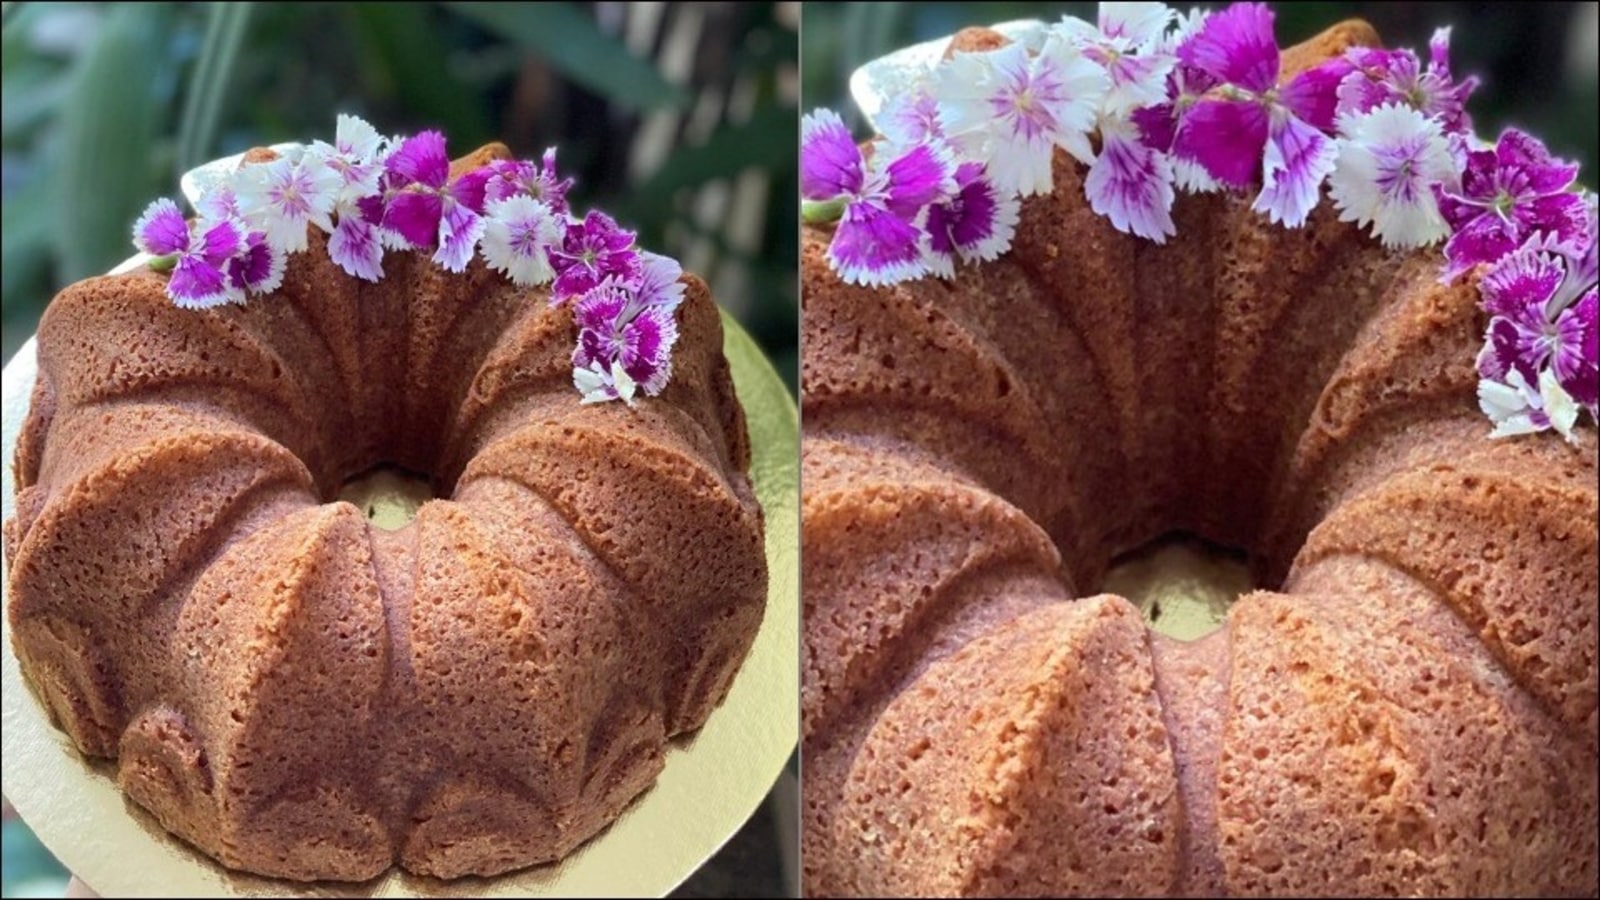 9 Bundt Cake Tips and Hacks for the Perfect Bundt Cake - Baking Kneads, LLC